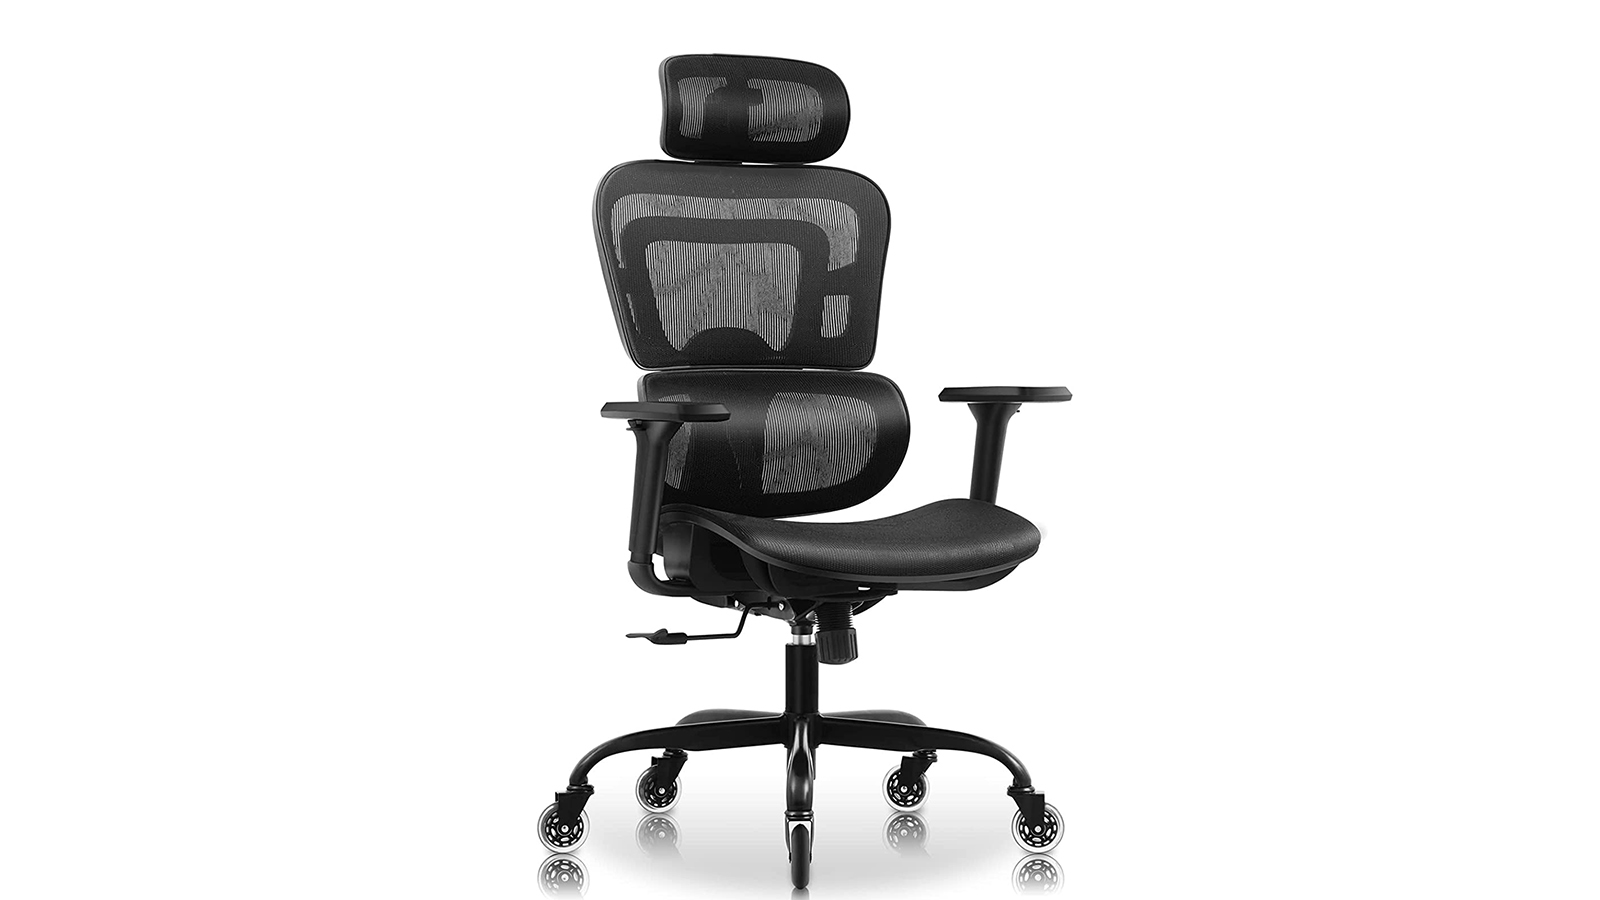 Reclining Office Chair with Foot Rest, Mesh Office Chair, Ergonomic Office  Chair with footrest, Computer Desk Chair with Lumbar Support Pillow, 280lb